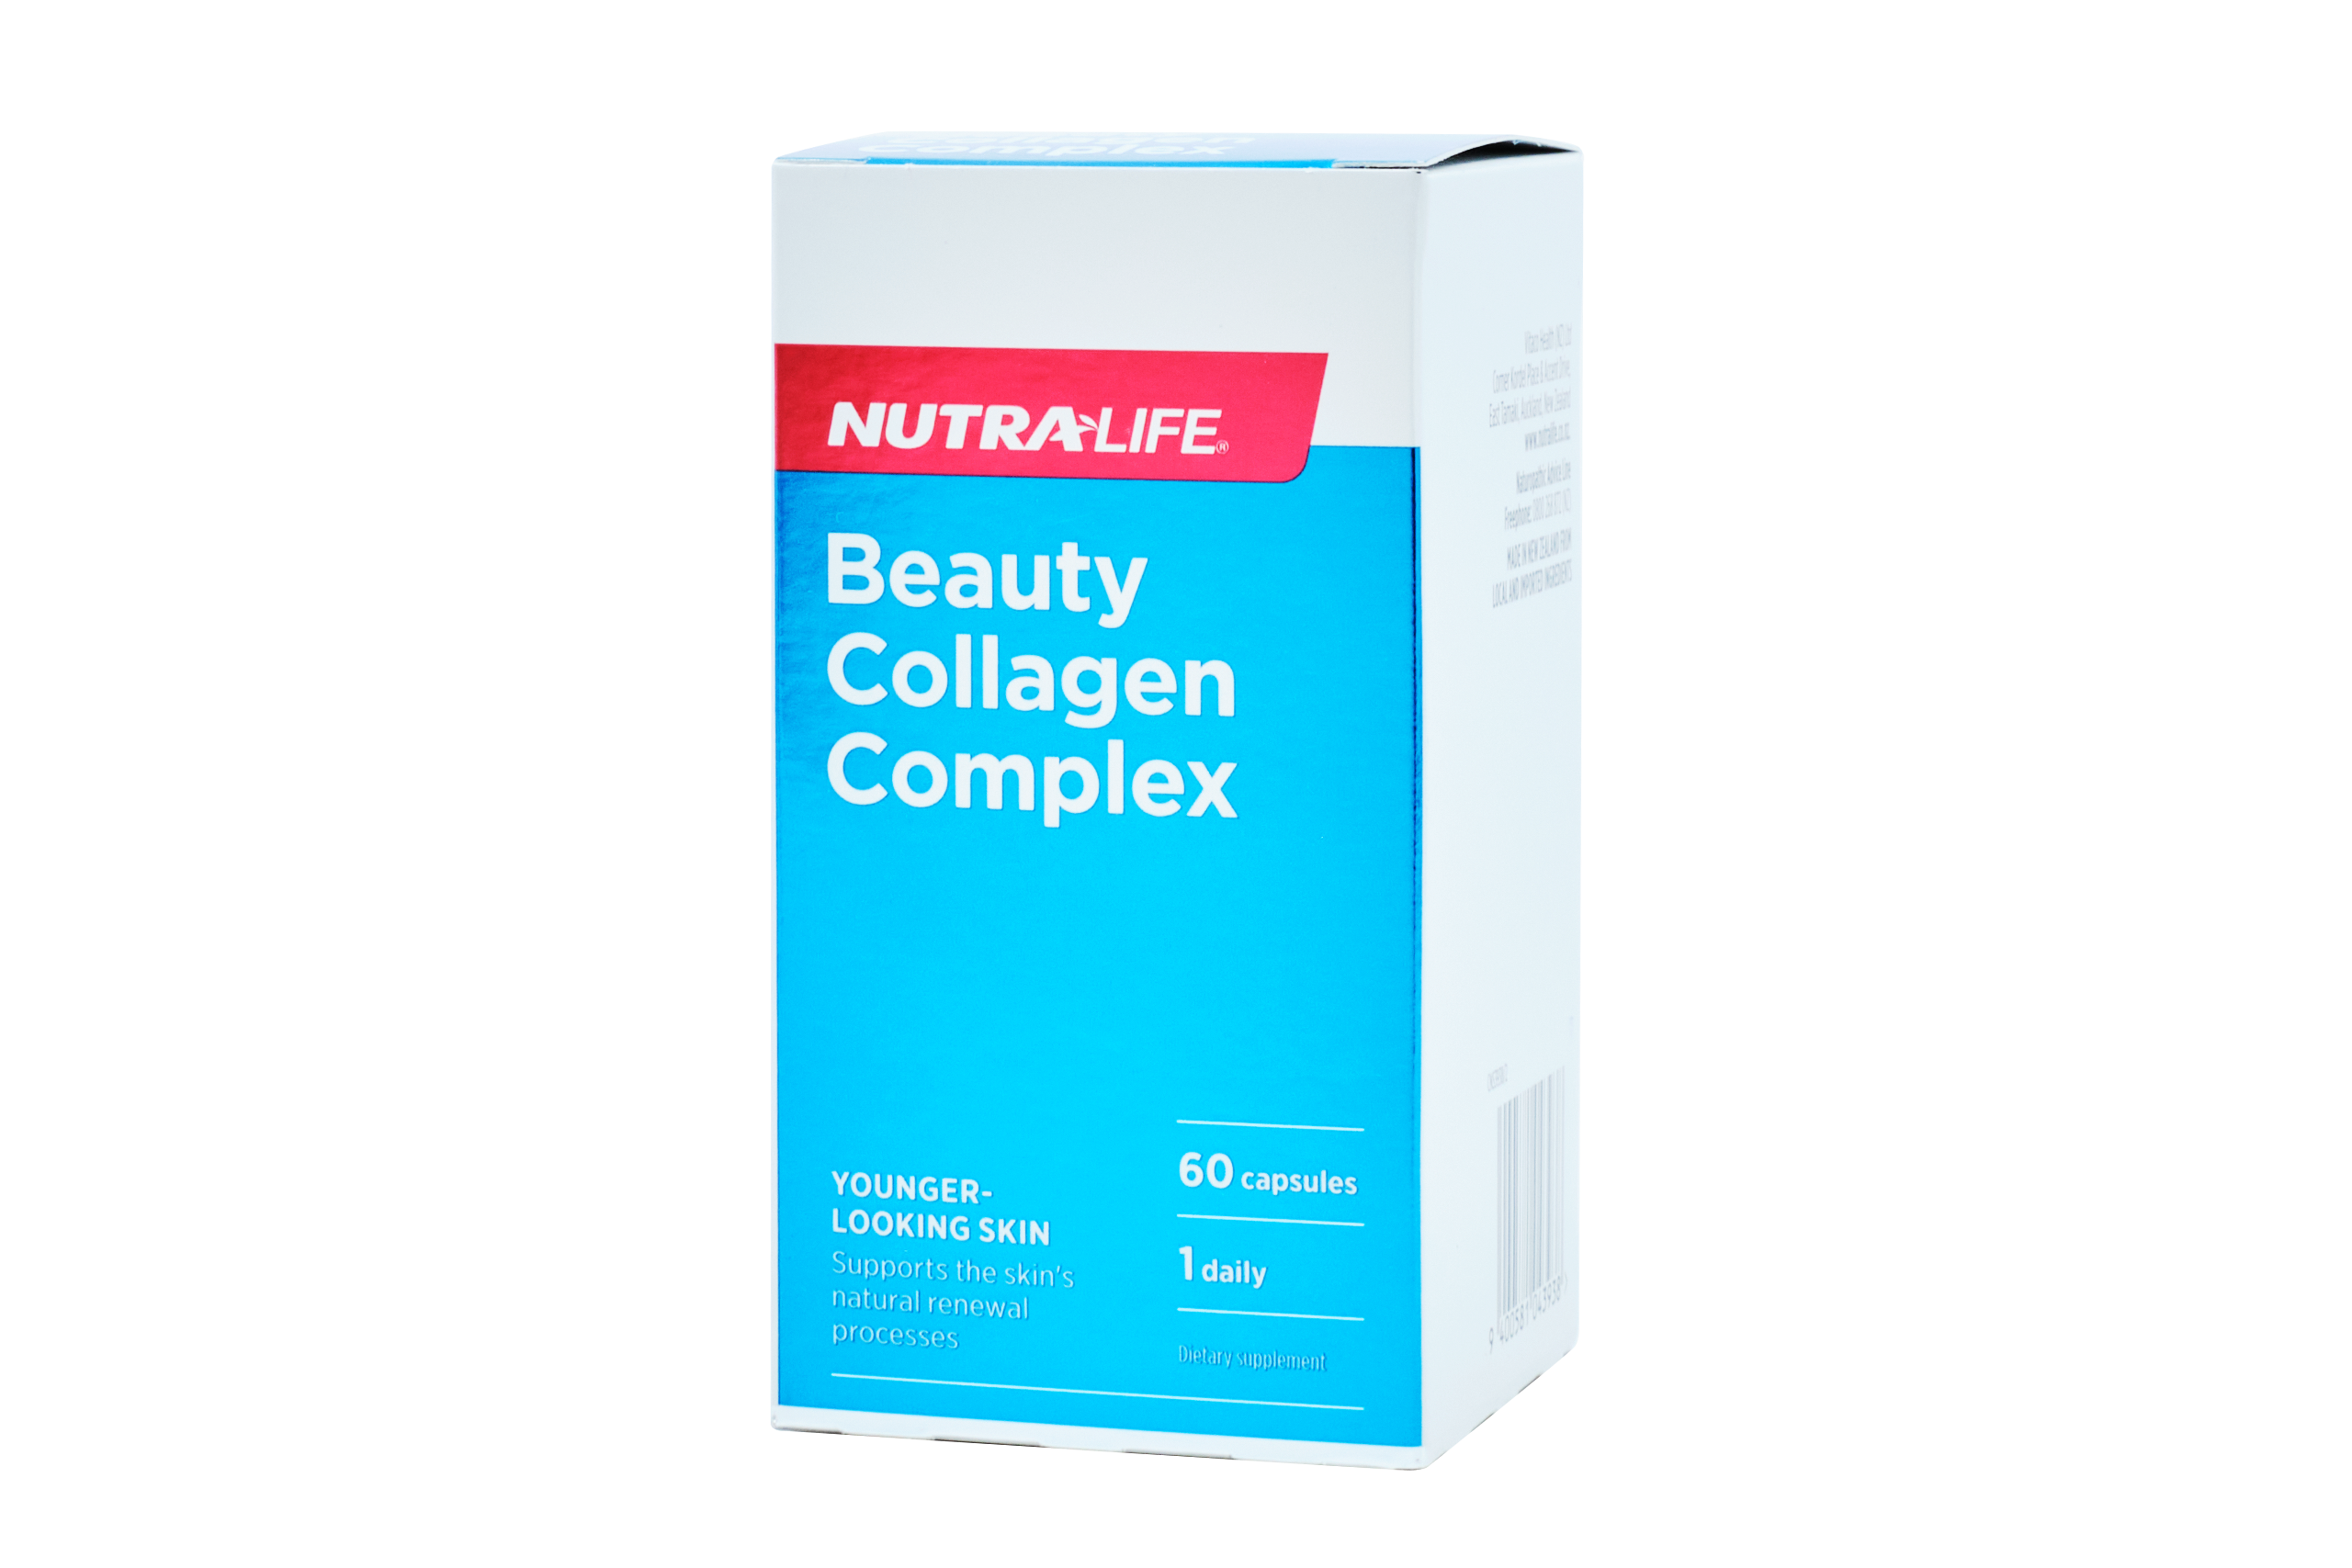 NUTRALIFE Beauty Collagen Complex 60 Capsules - 365 Health Limited